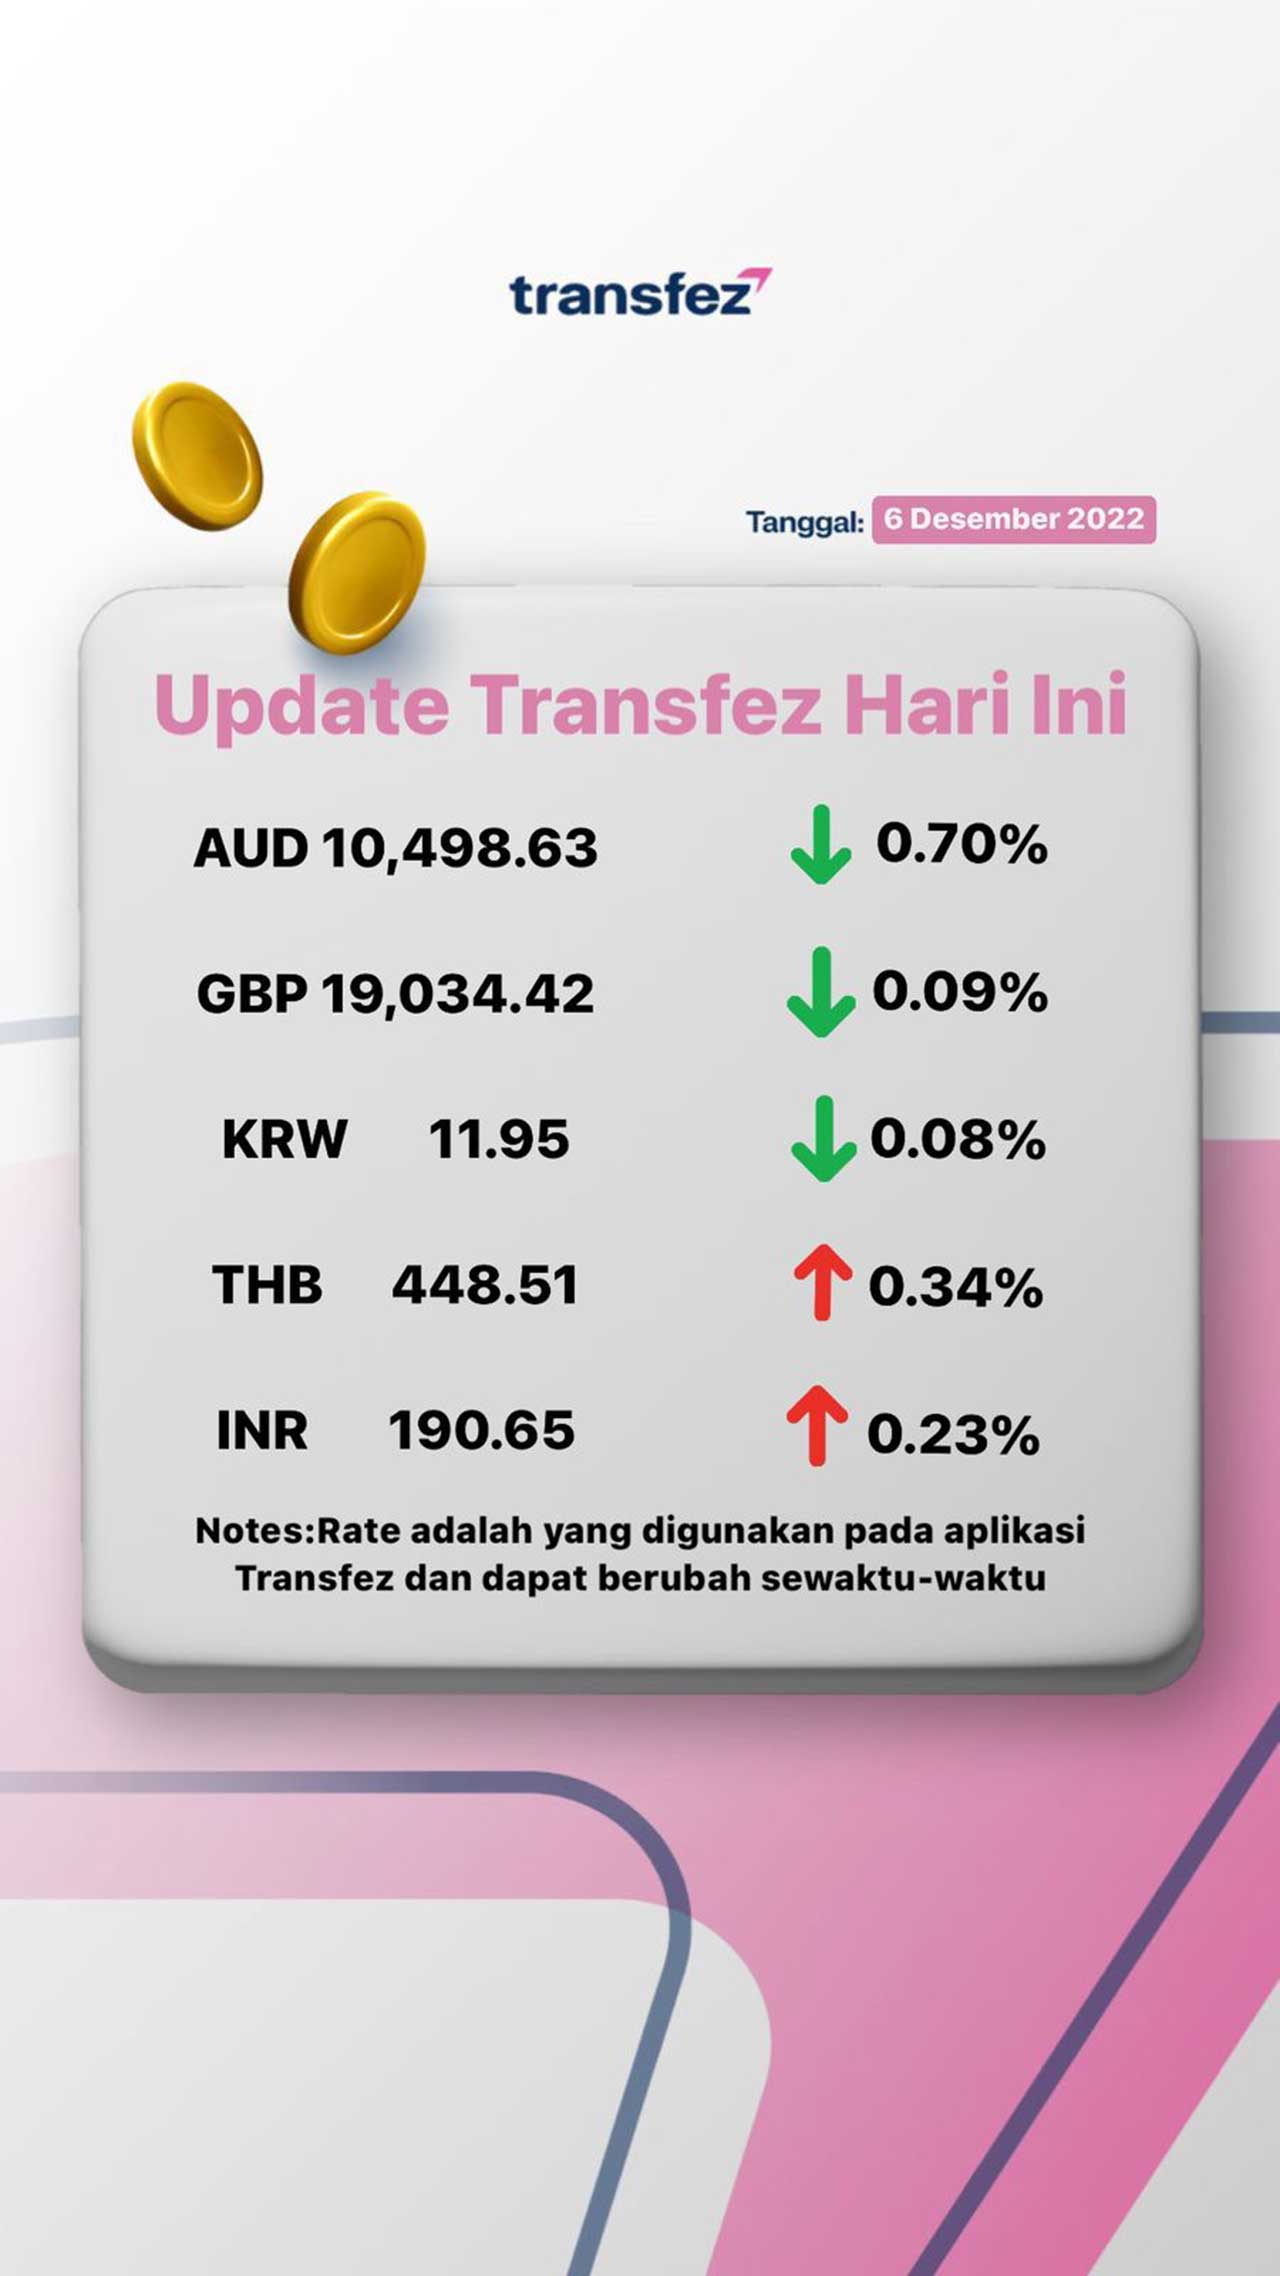 Today's Transfez Rate Update 06 December 2022